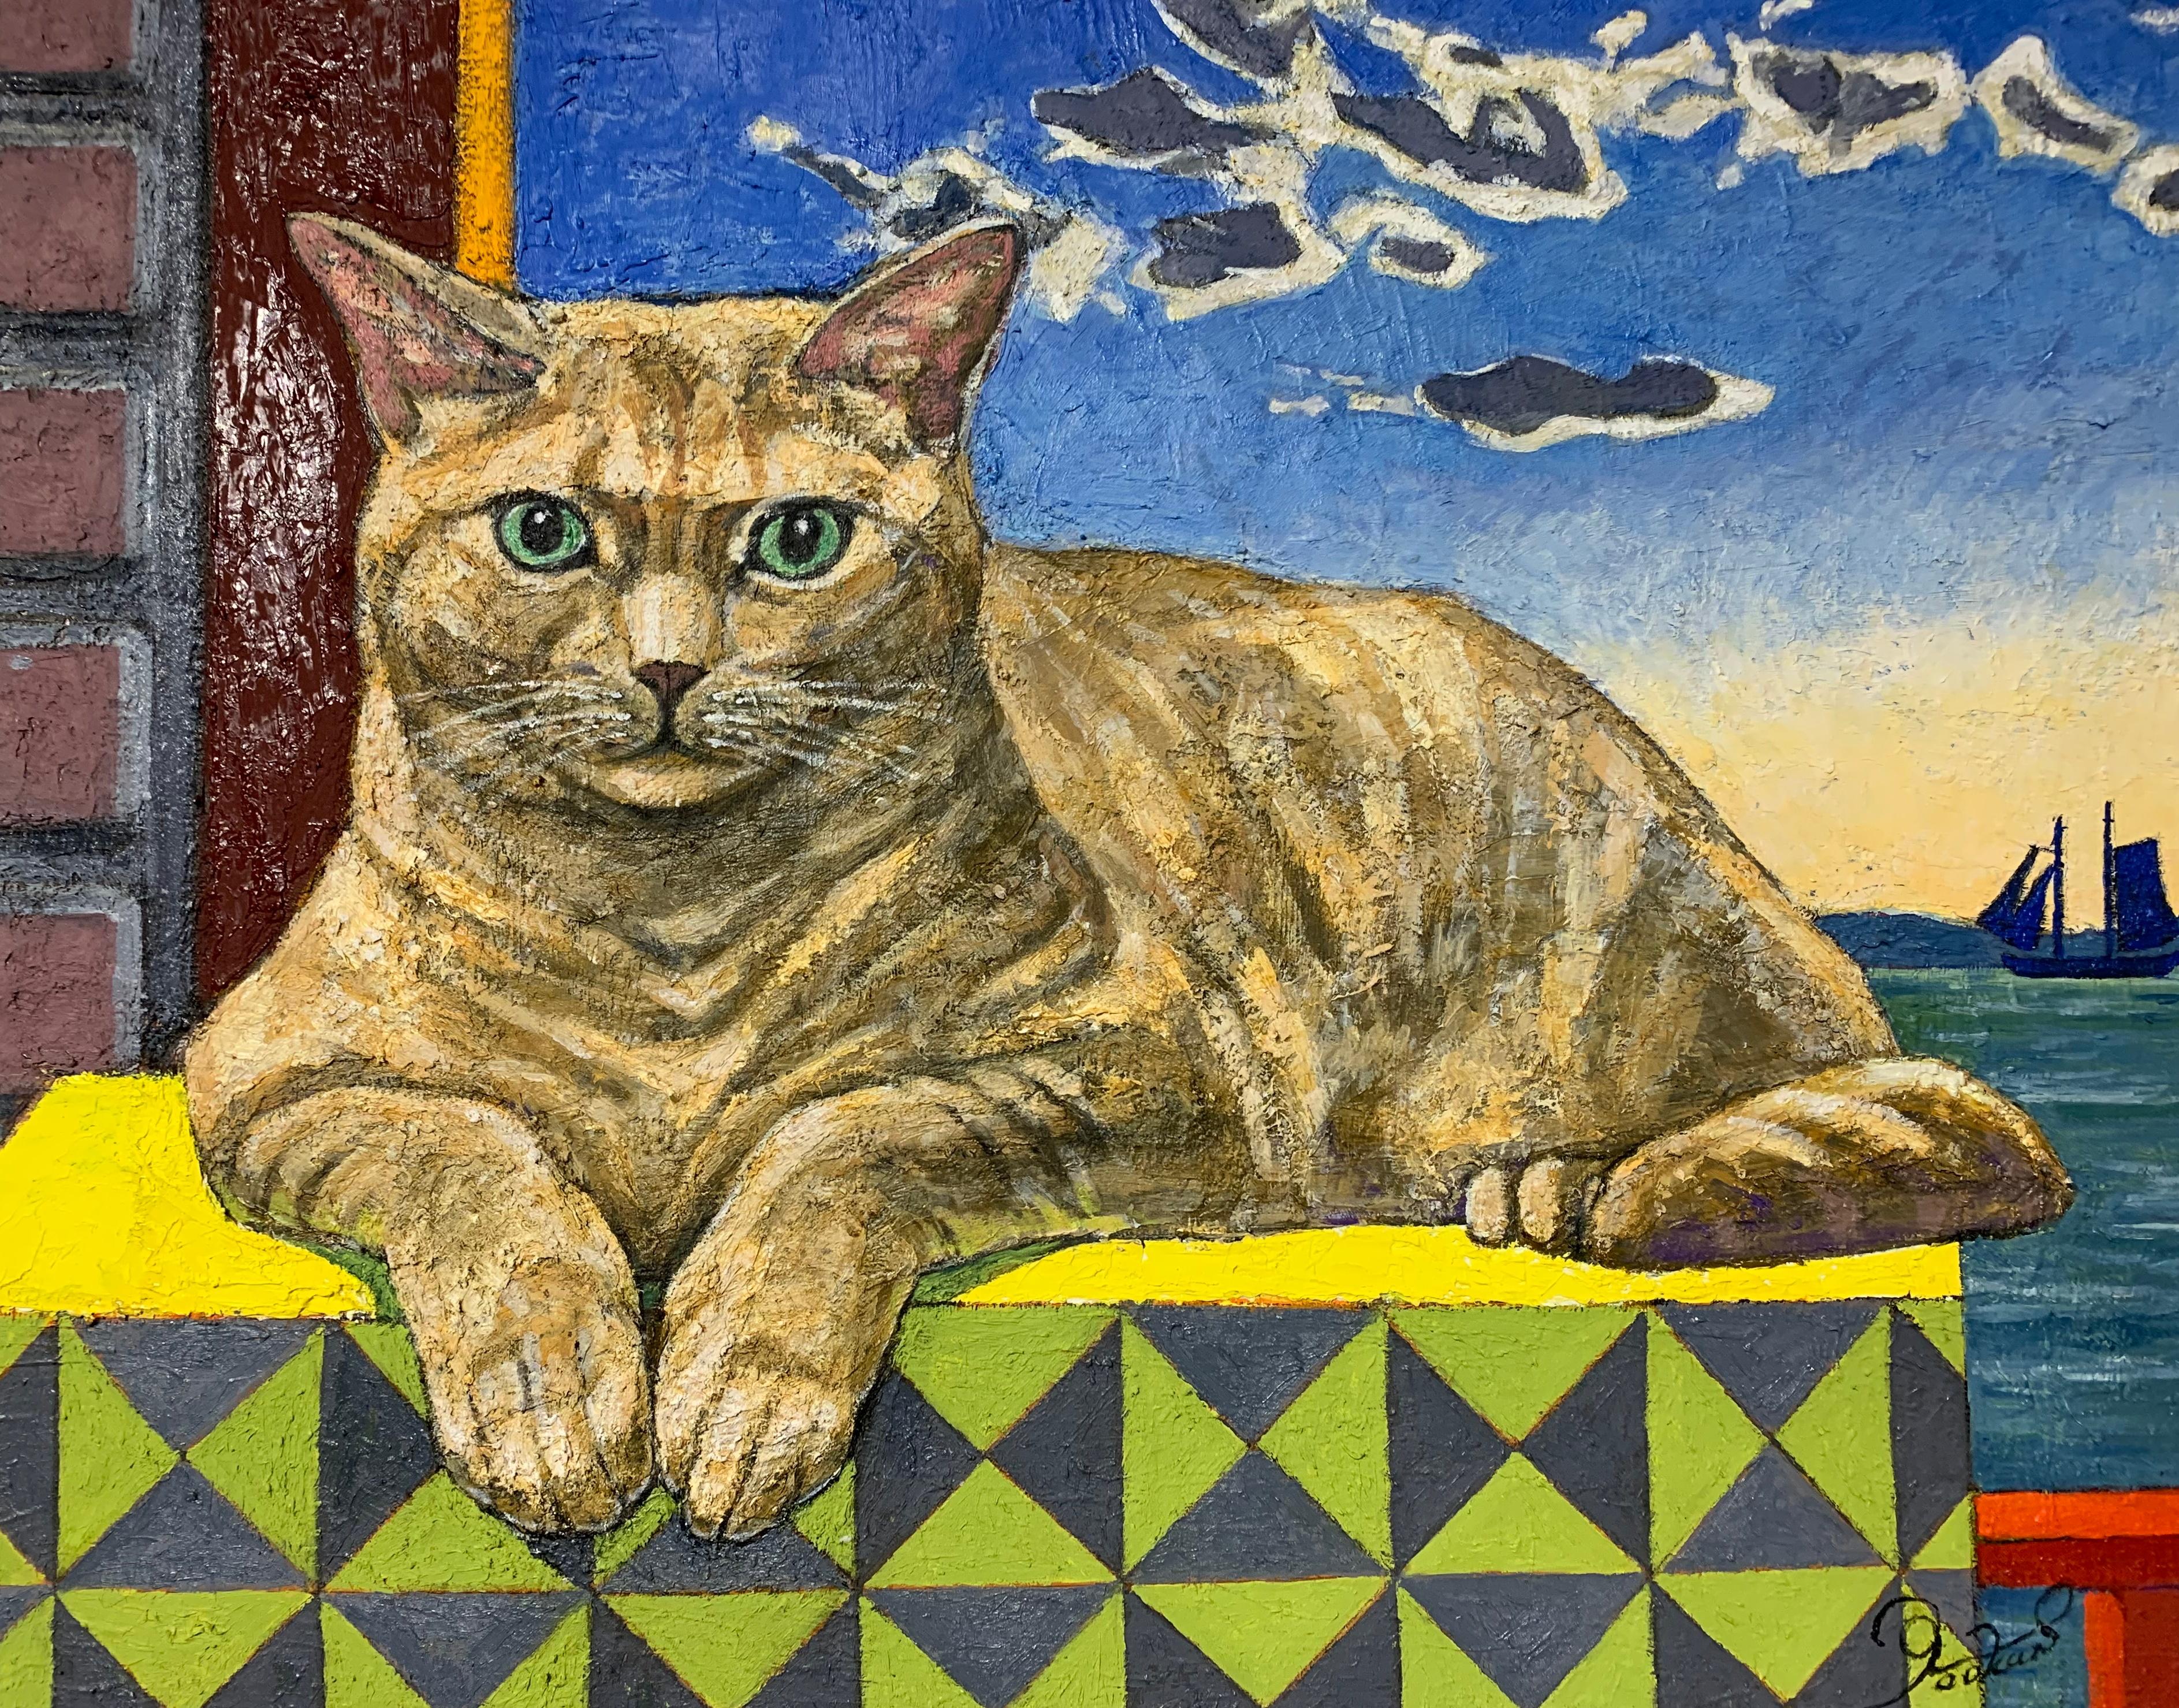 Orange Cat's Thoughts (original painting by renowned cat painter) - Painting by Yookan Westfield